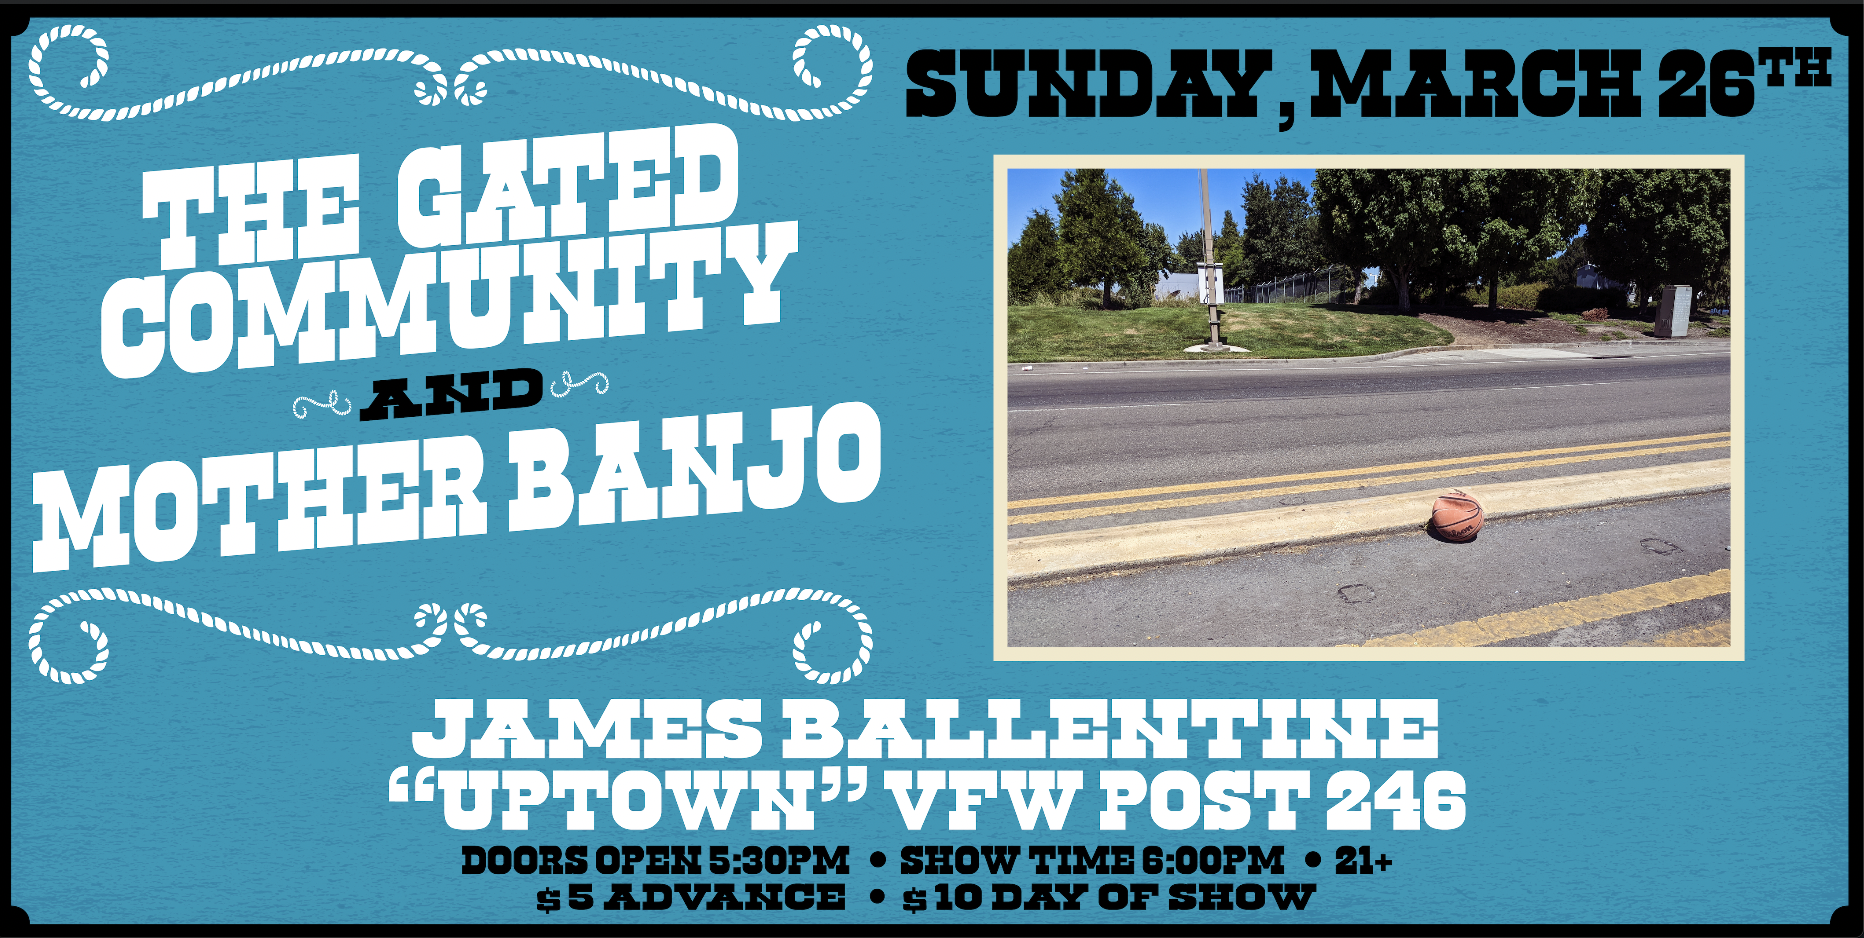 The Gated Community w/ Mother Banjo Sunday March 26 James Ballentine "Uptown" VFW Post 246 Doors 5:30pm :: Music 6:00pm :: 21+ GA $5 ADV / $10 DOS NO REFUNDS